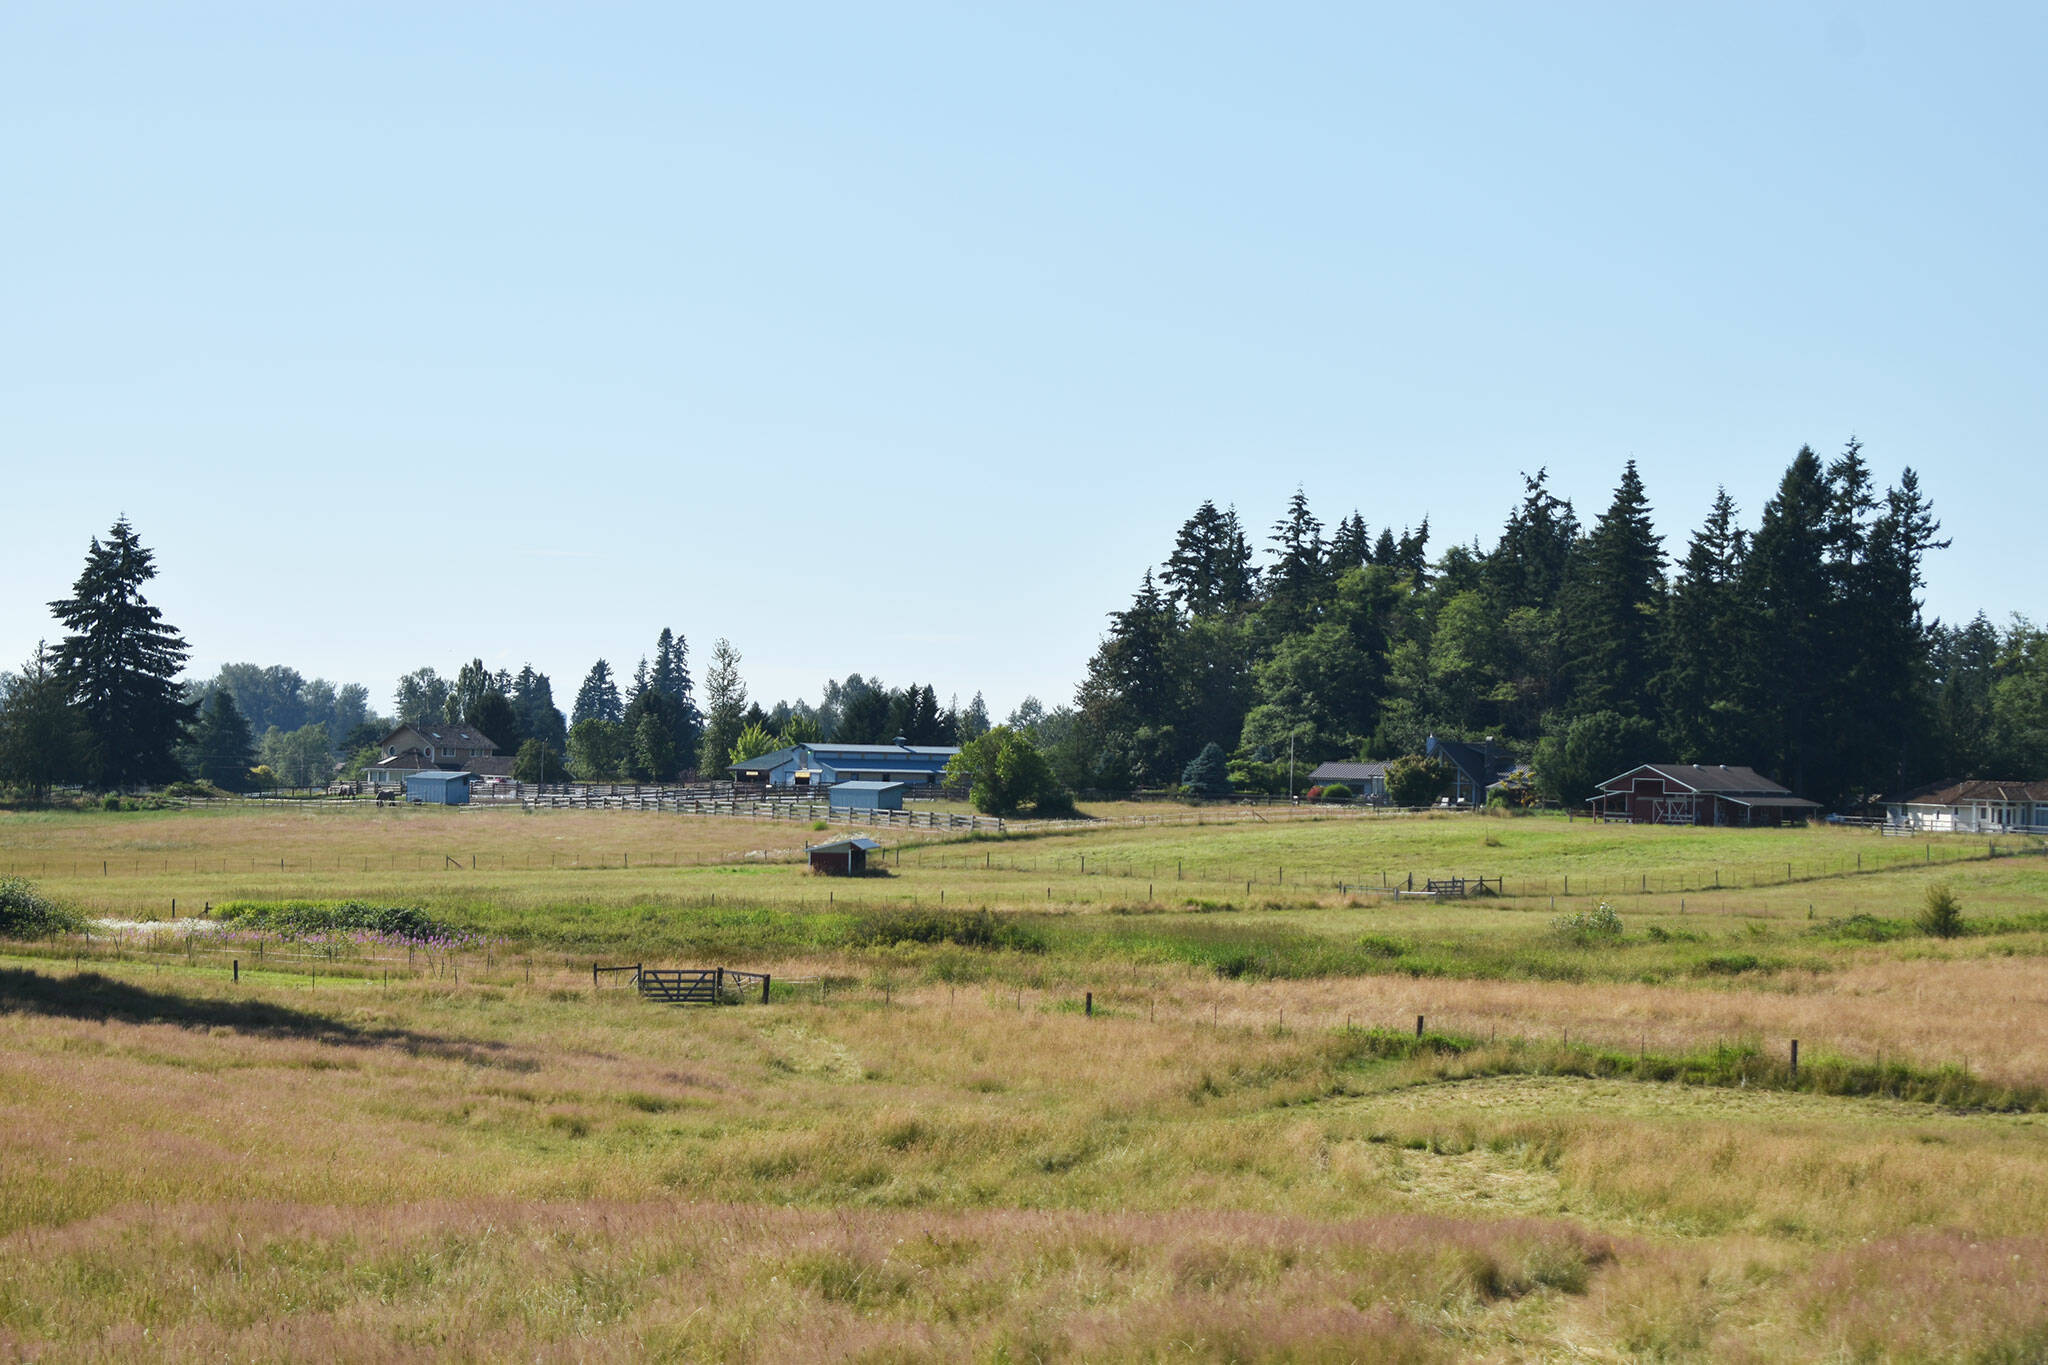 Can you imagine airplanes flying over these plains? This farmland on the Enumclaw Plateau near the intersection of 196th Ave SE and SE 400th St is near the area that an aviation study dubbed as a potential “King County Southeast” airport in a report considering locations for the state’s next airport. No location has yet been selected. Photo by Alex Bruell.